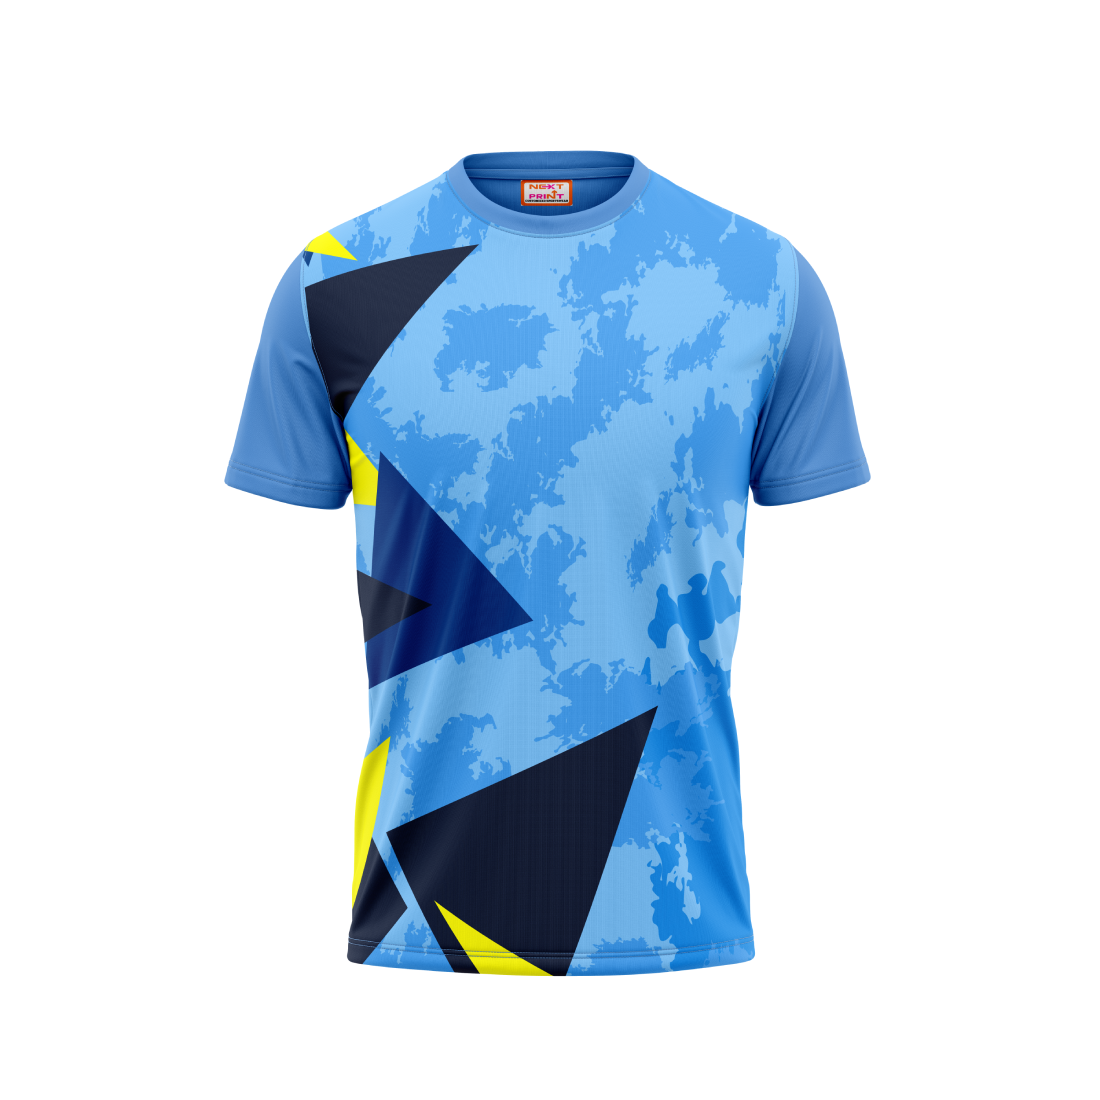 Round Neck Printed Jersey Skyblue NP5000058